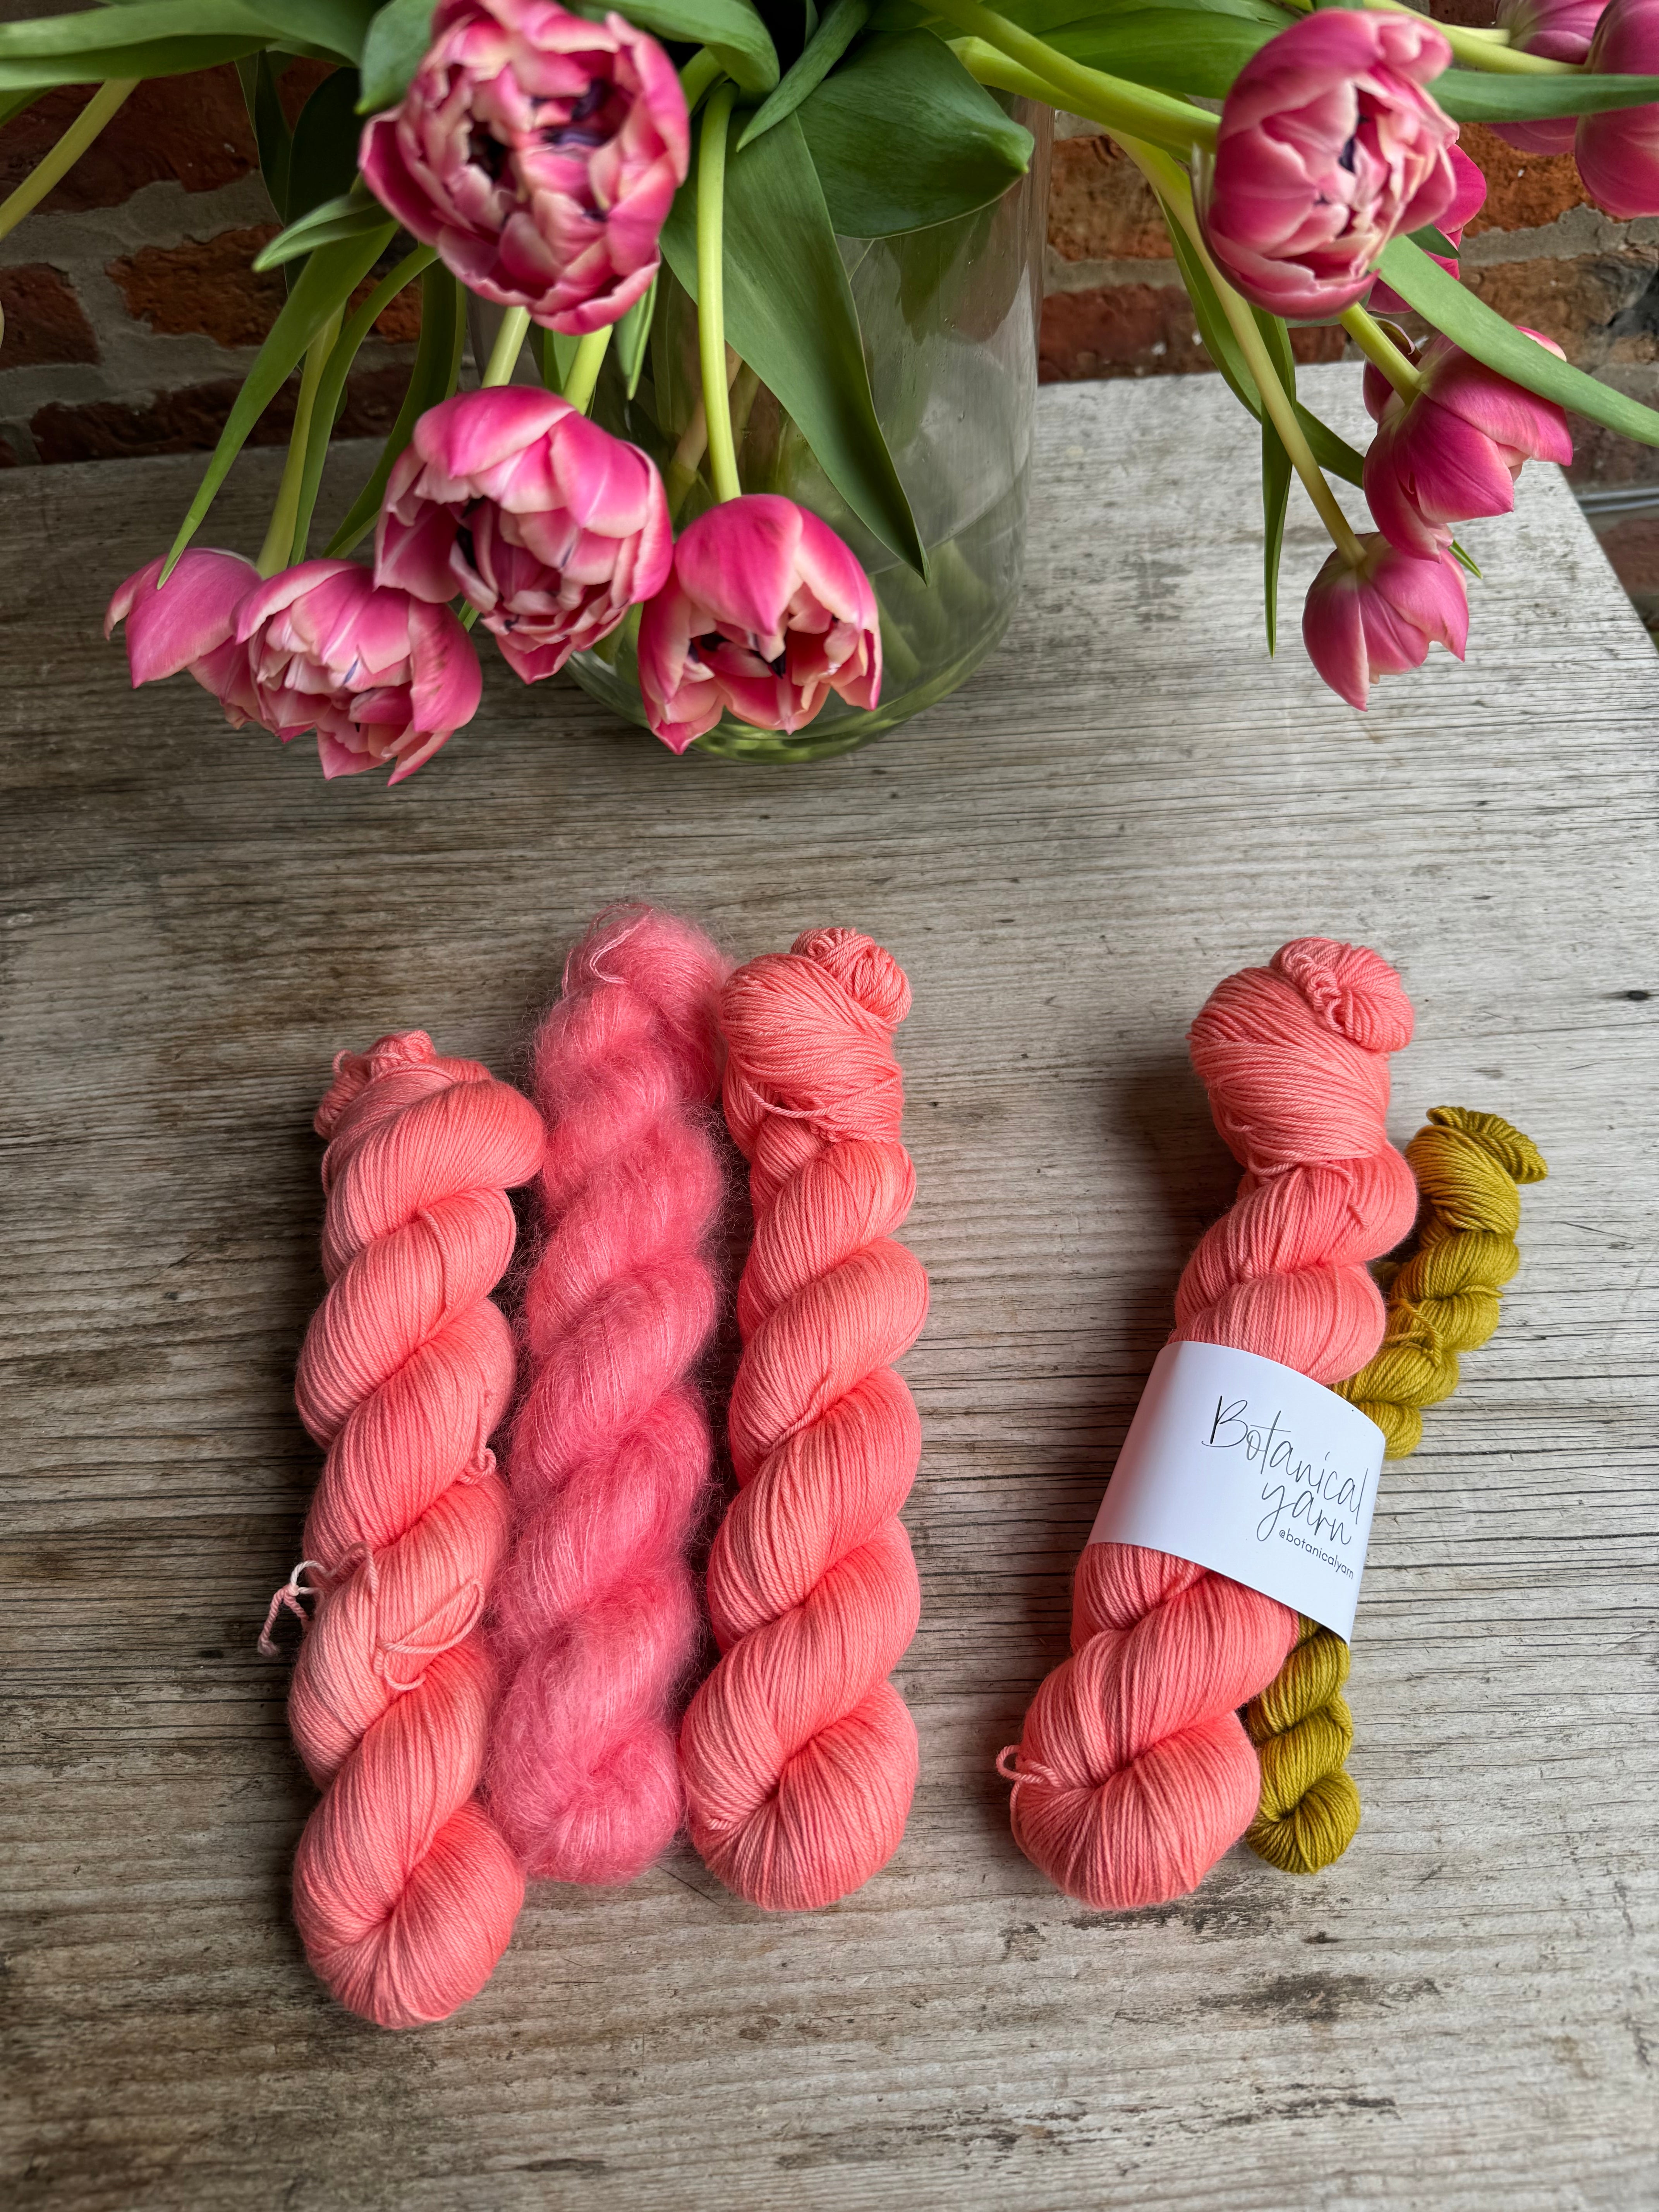 Dyed to order - Tulip Apricot Impression